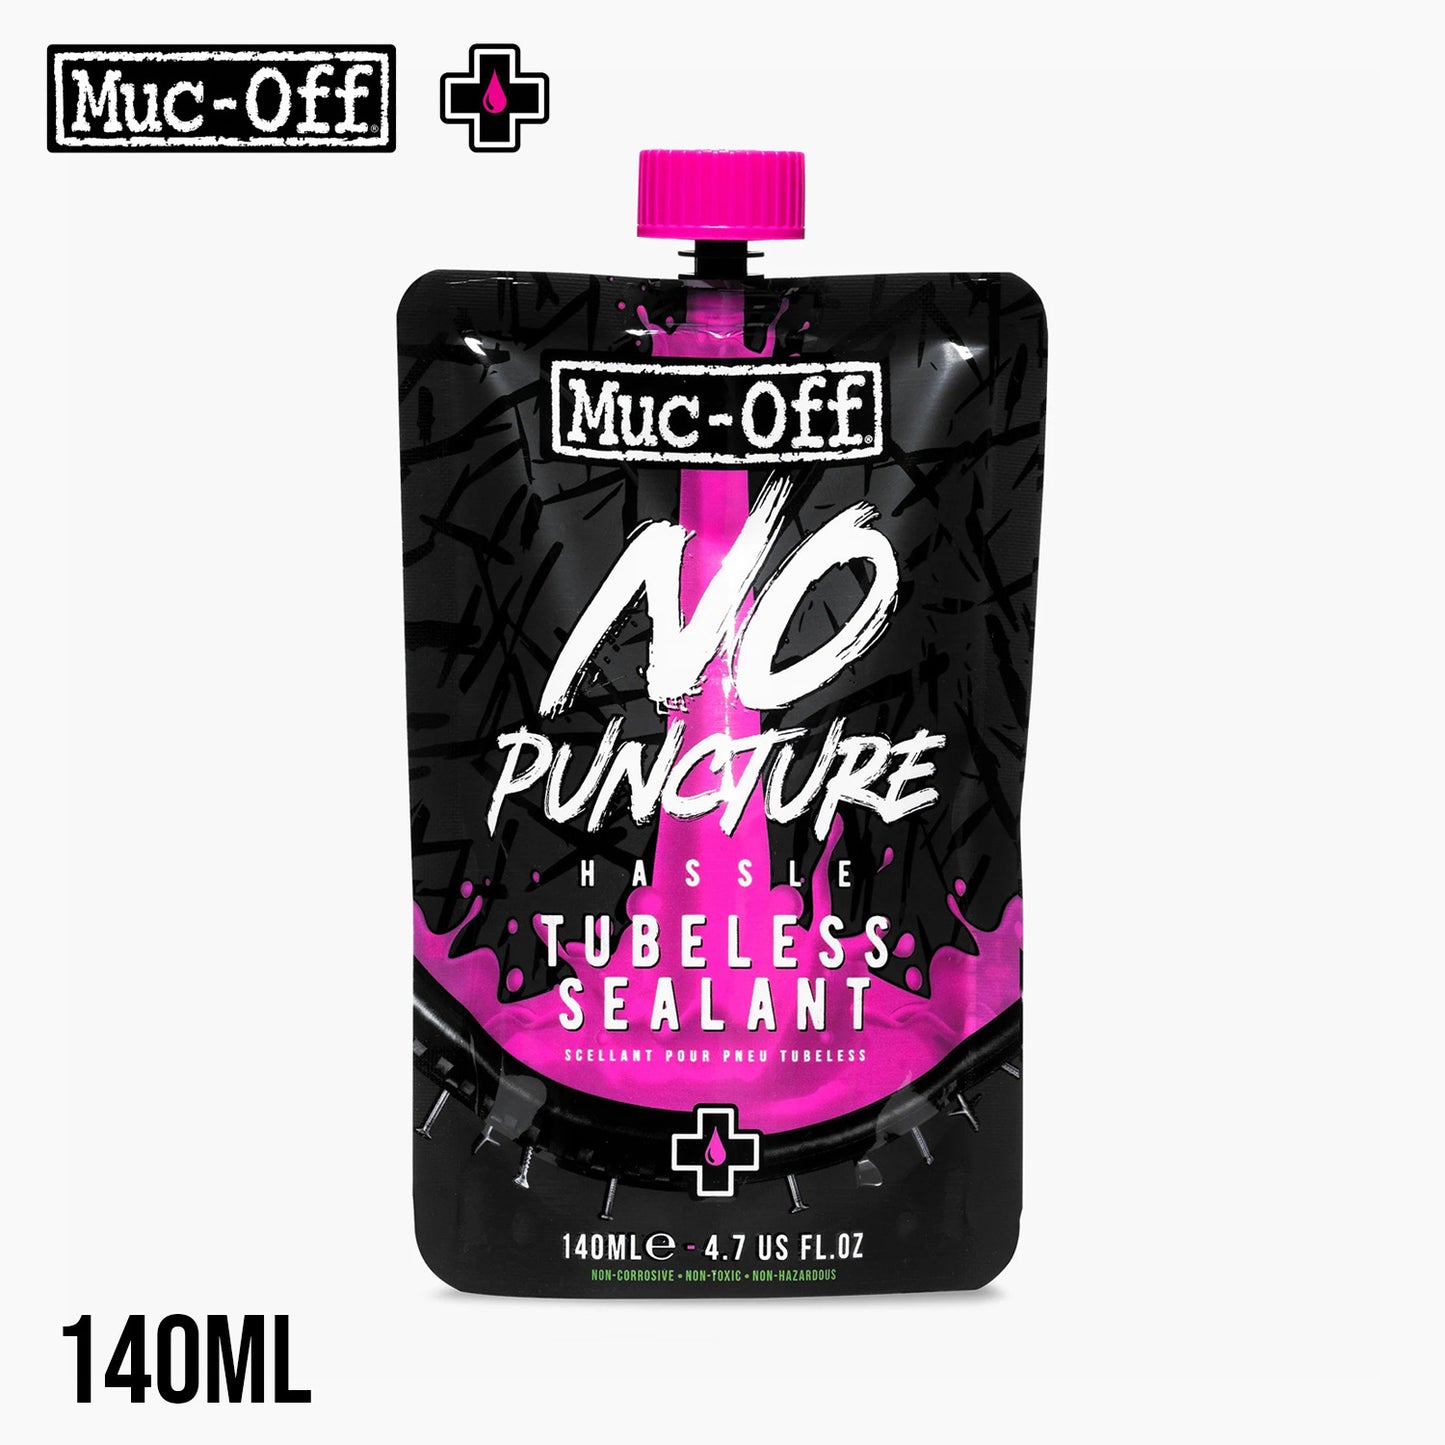 Muc-Off No Puncture, No Hassle Tubeless Sealant